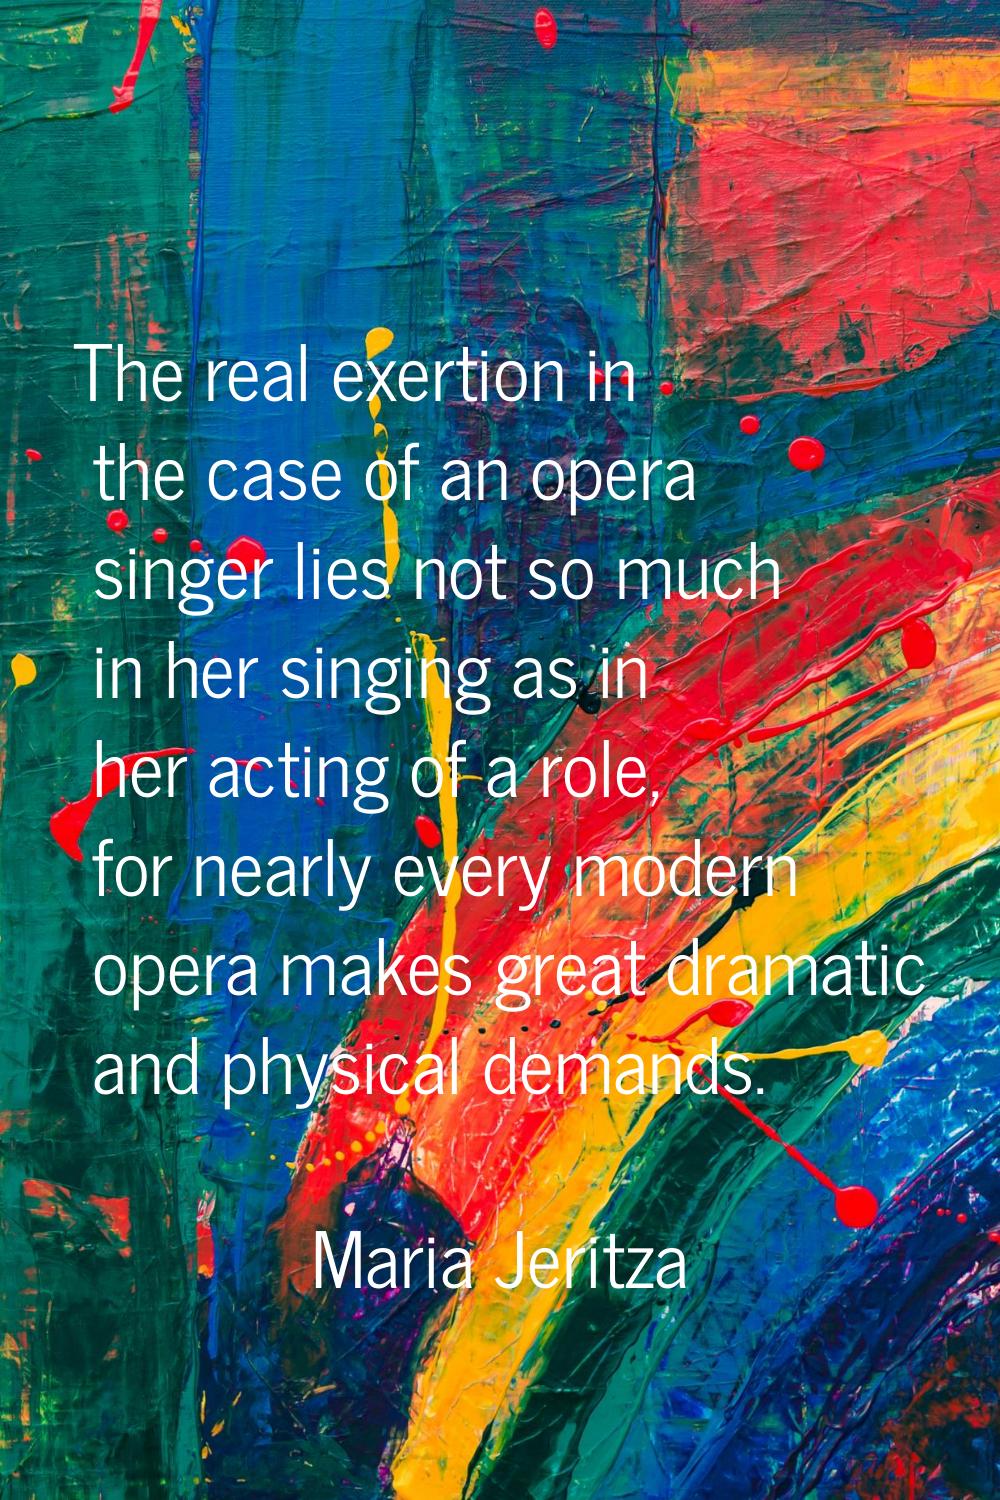 The real exertion in the case of an opera singer lies not so much in her singing as in her acting o